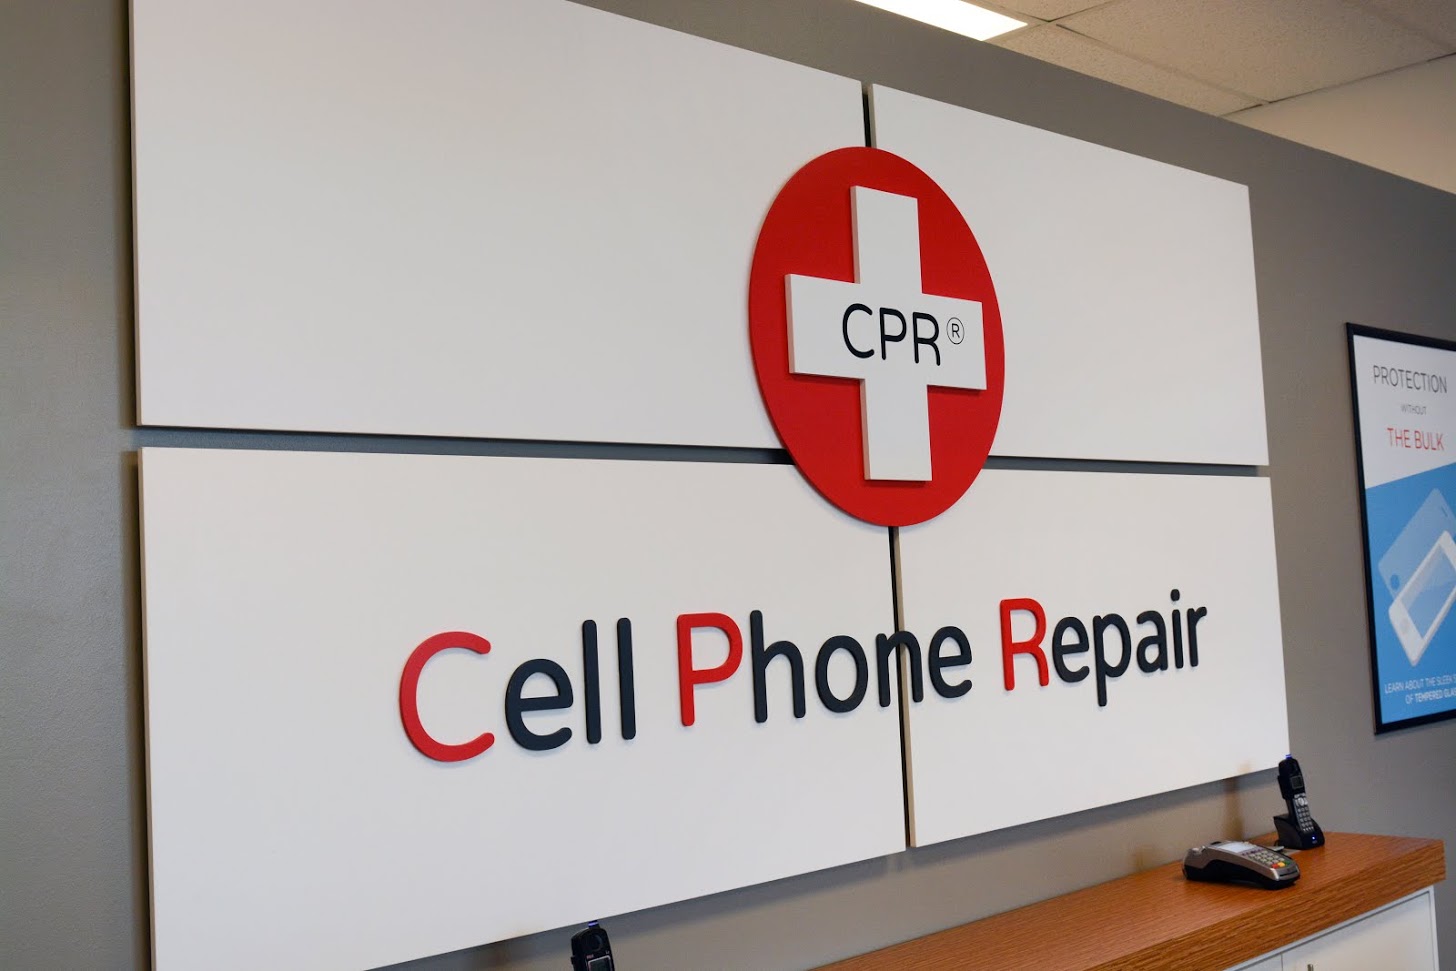 CPR Cell Phone Repair, Friday, August 23, 2019, Press release picture